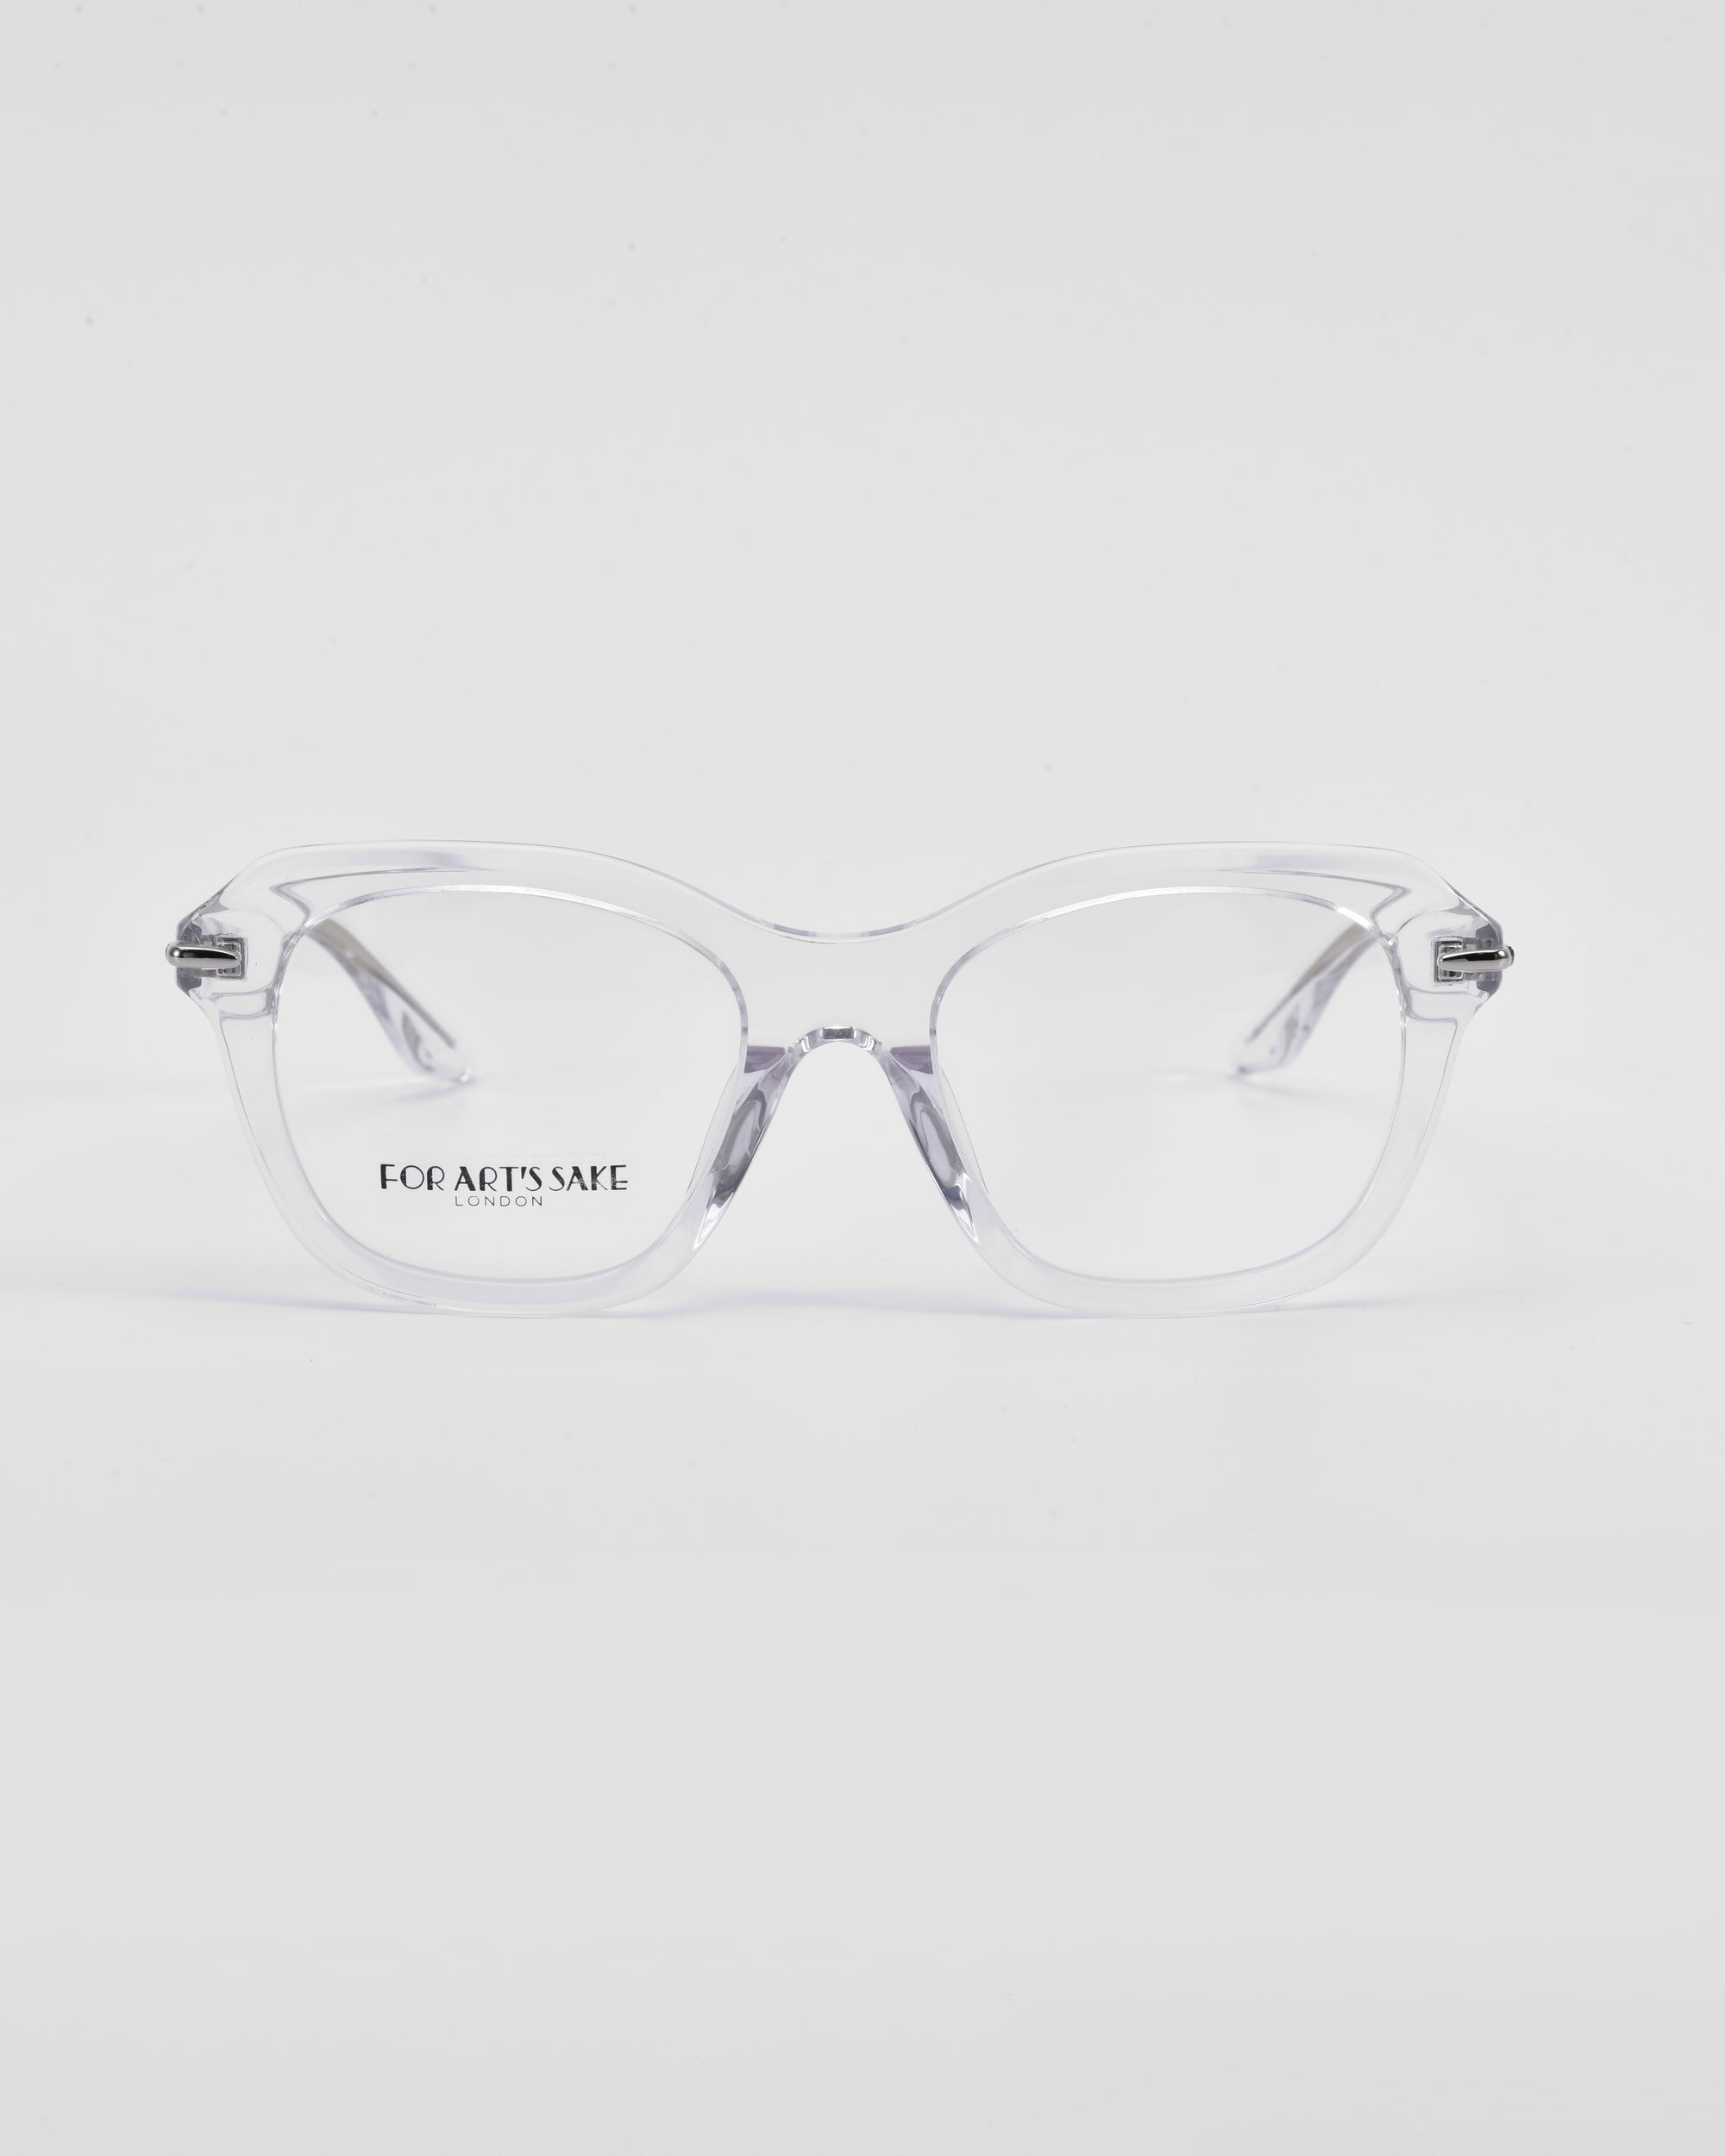 A pair of clear eyeglasses with transparent frames and a hint of a cat-eye silhouette rest on a white surface. The lenses have the text &quot;For Art&#39;s Sake® Helene&quot; printed on the left side. The design is minimalist and modern, with slightly thick frames and a subtle, elegant appearance.